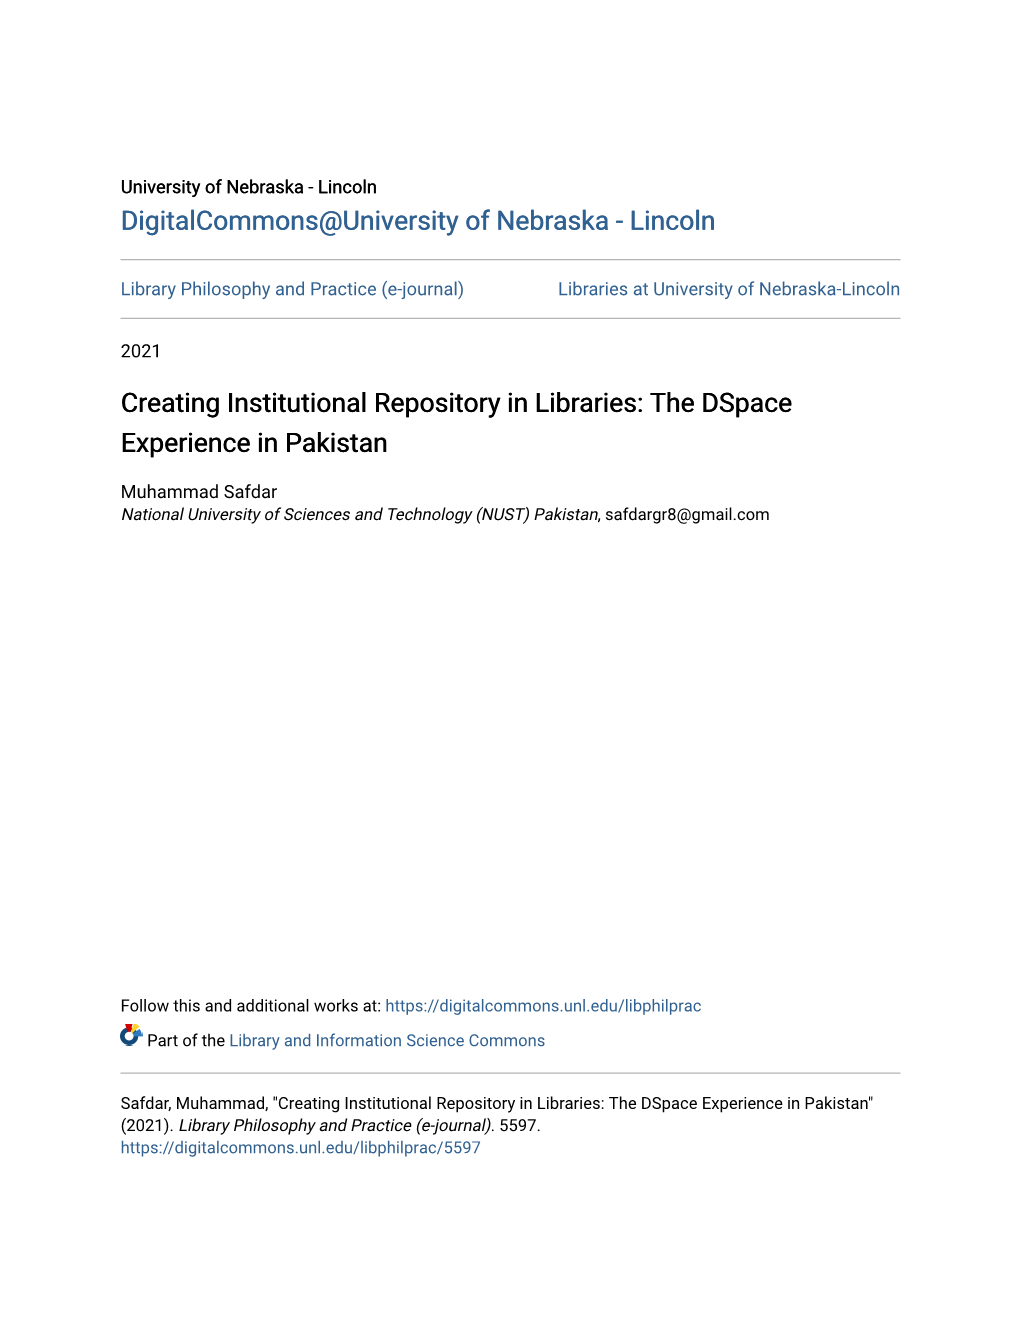 Creating Institutional Repository in Libraries: the Dspace Experience in Pakistan